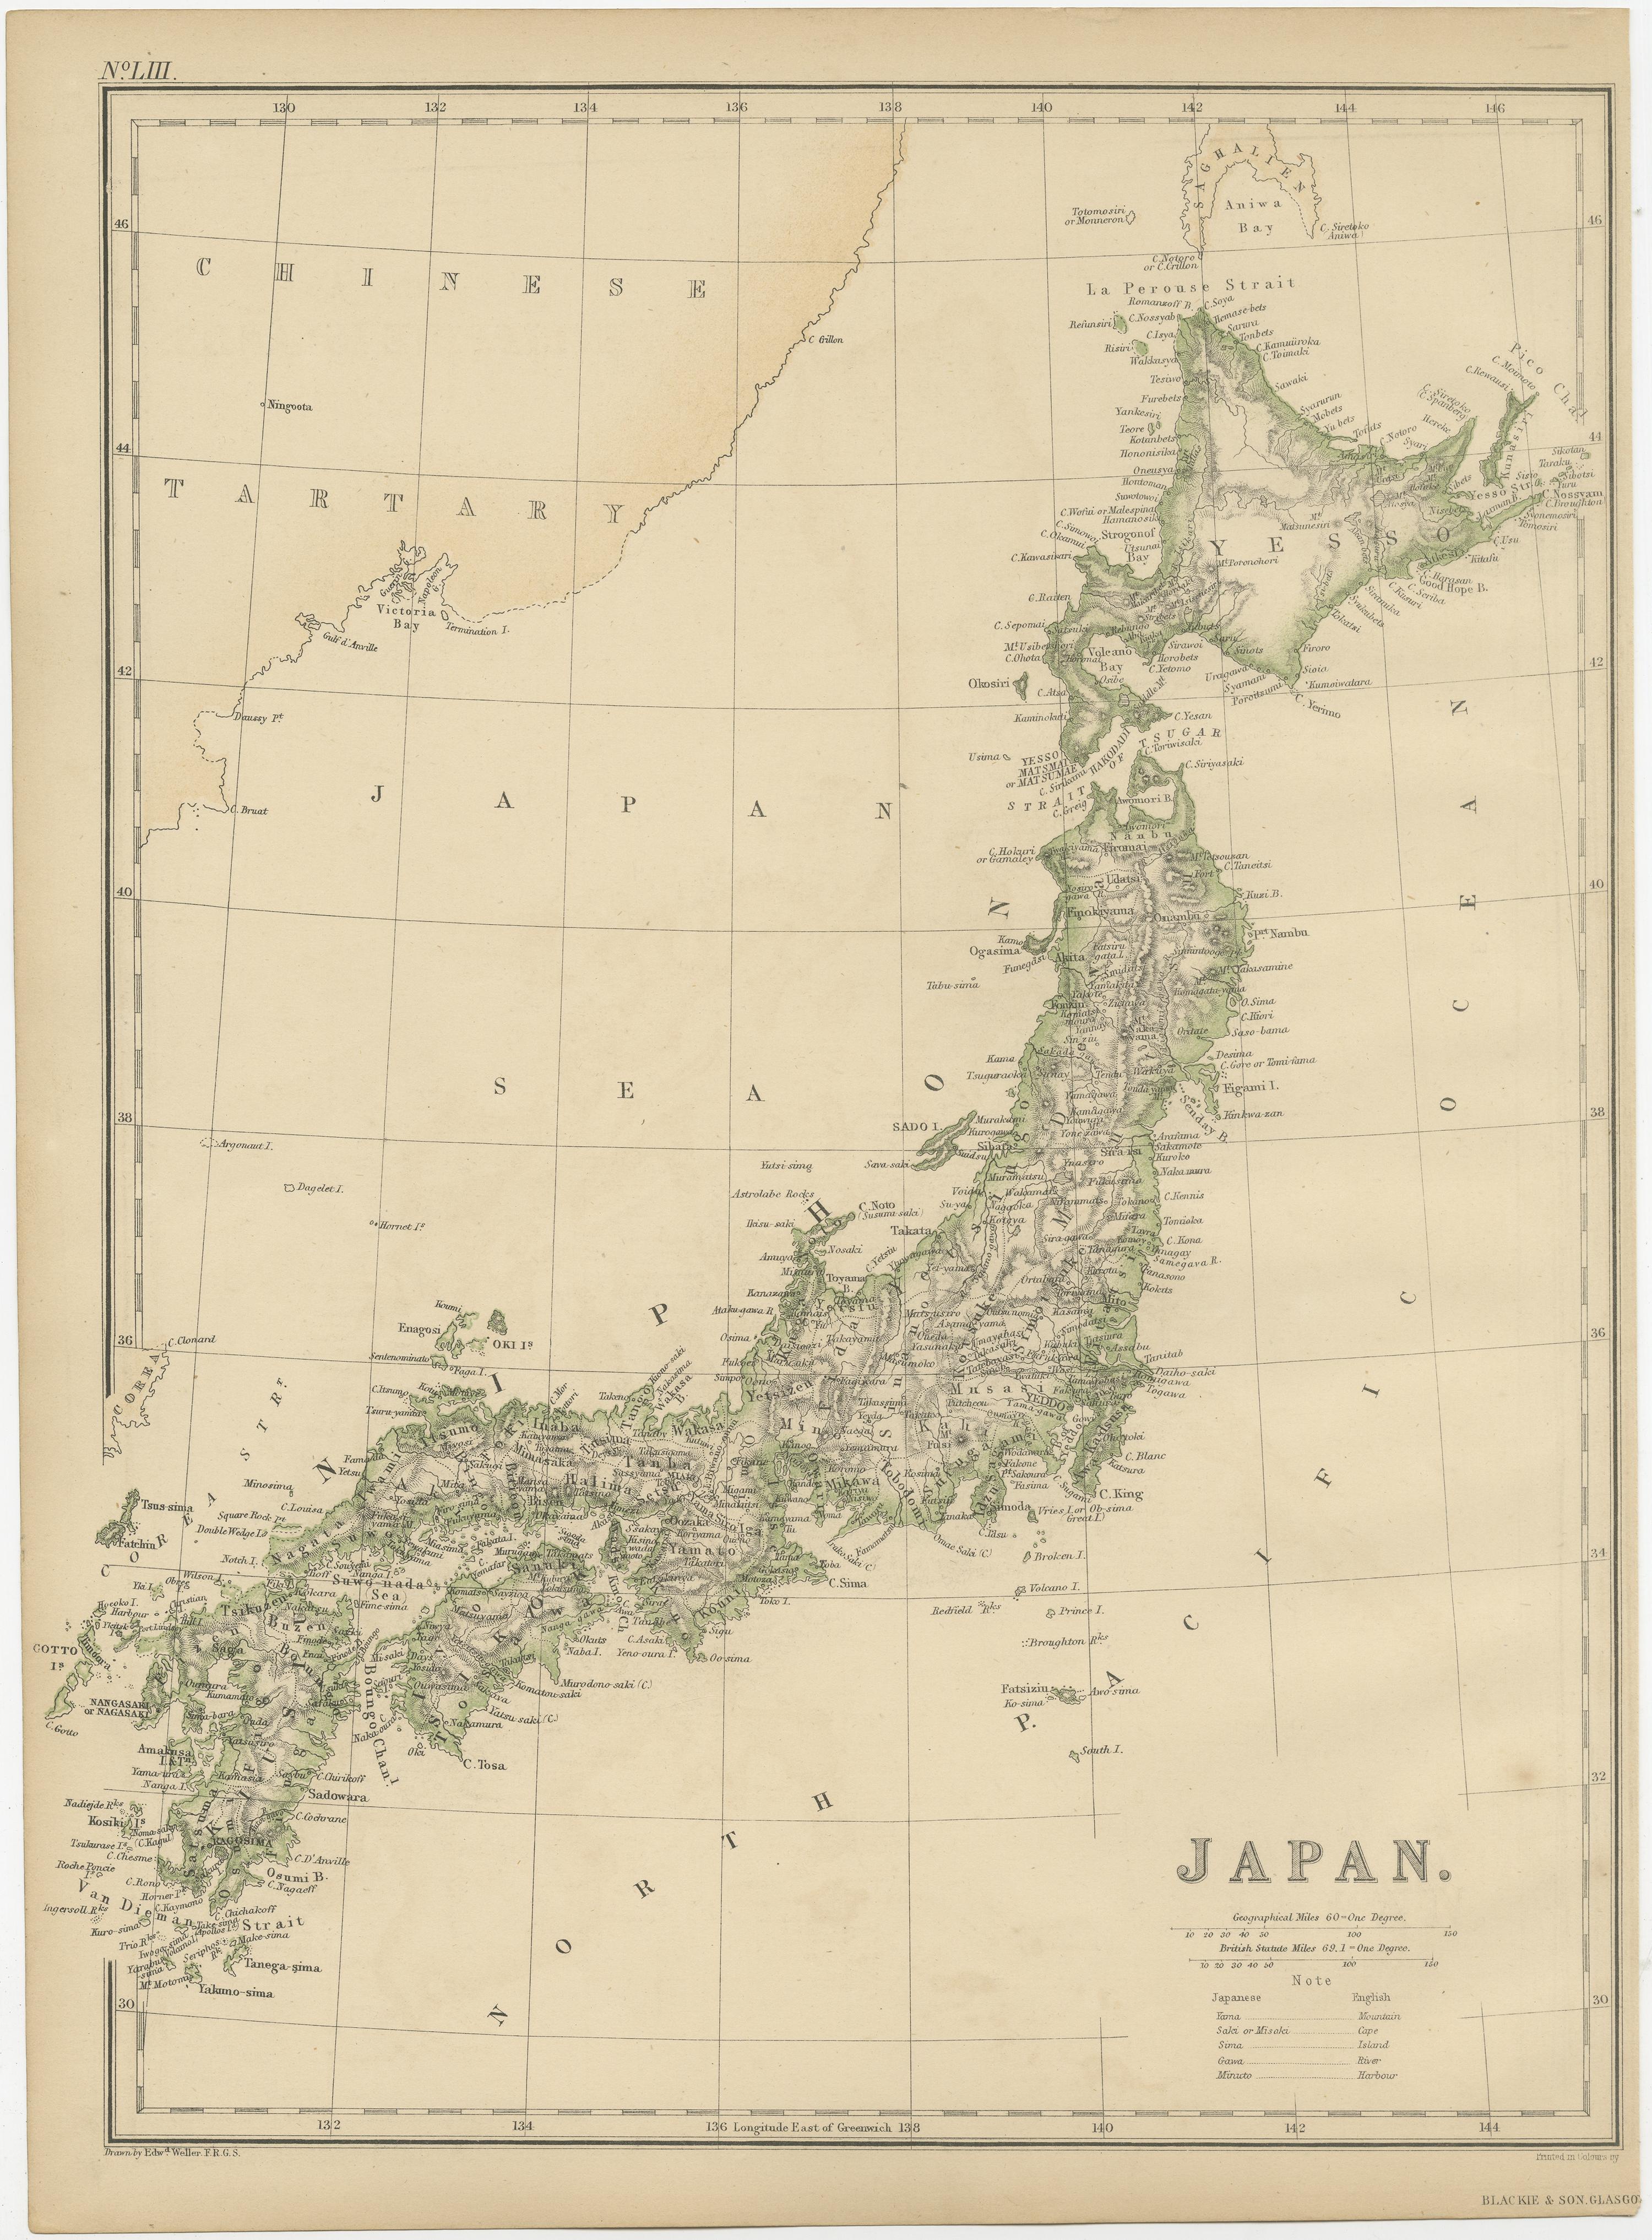 Antique map titled 'Japan'. Original antique map of Japan. This map originates from ‘The Imperial Atlas of Modern Geography’. Published by W. G. Blackie, 1859.